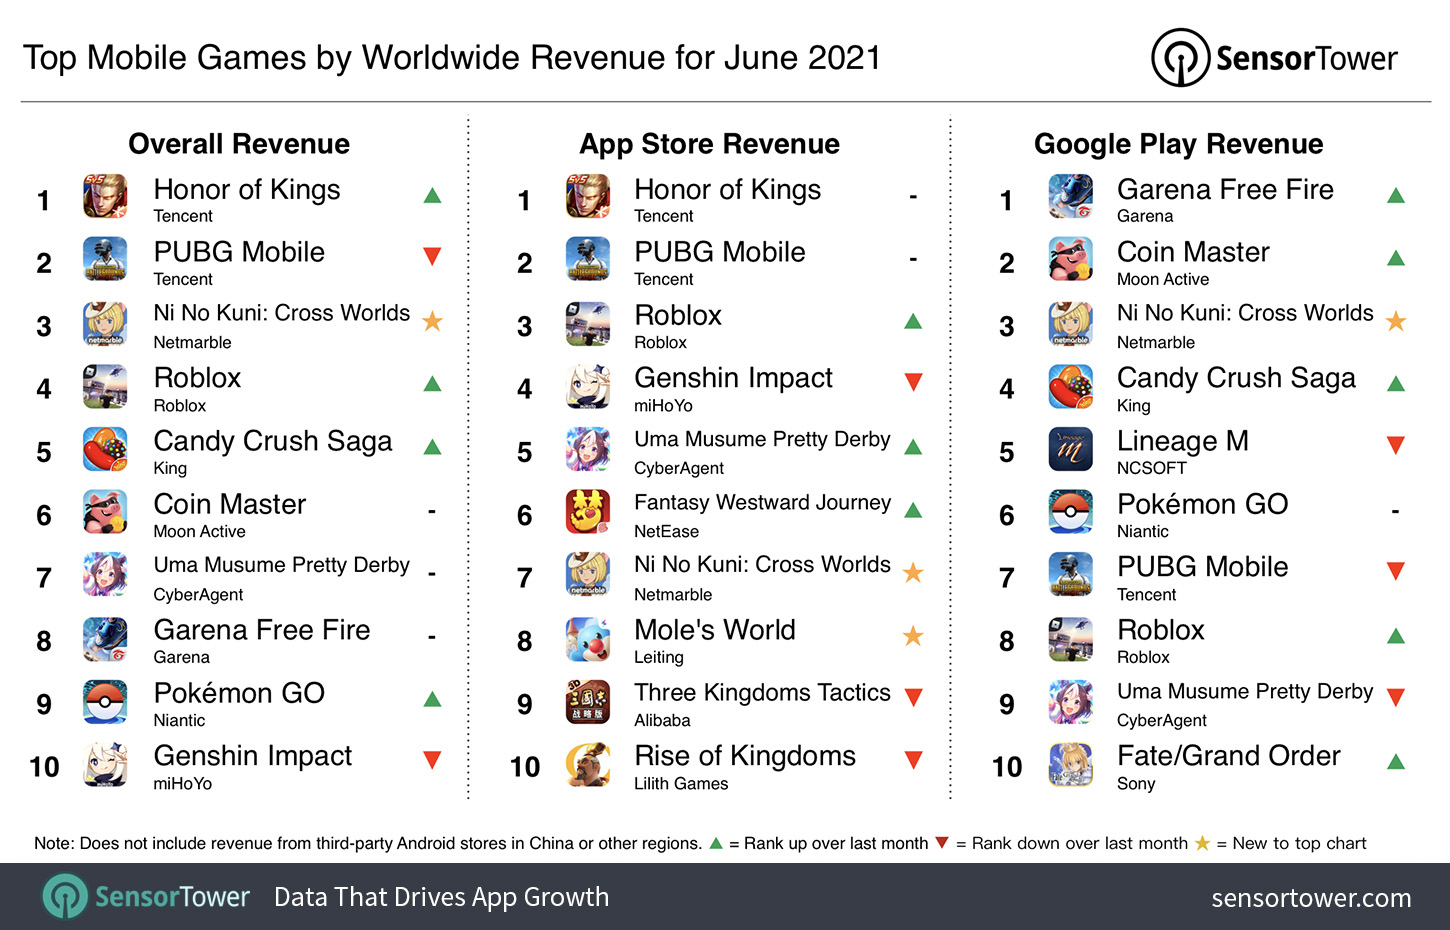 Top Grossing Mobile Games Worldwide for June 2021